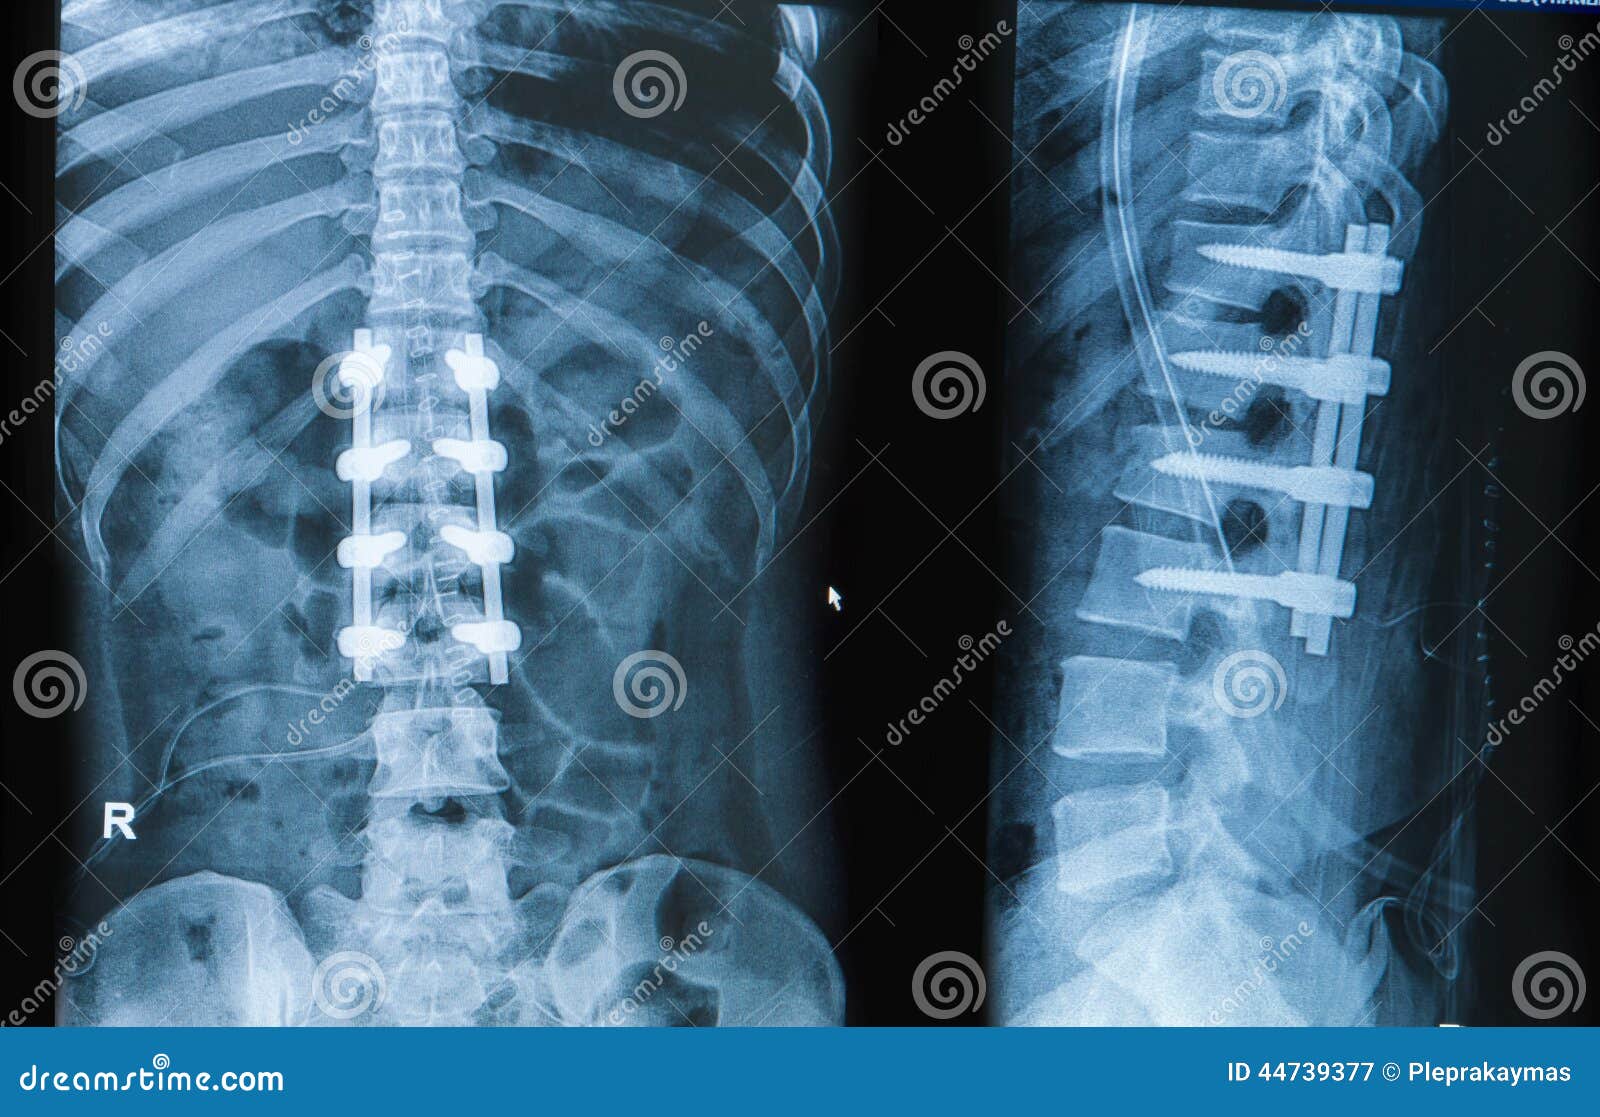 x-ray image of back pain show spinal column with implant fusion